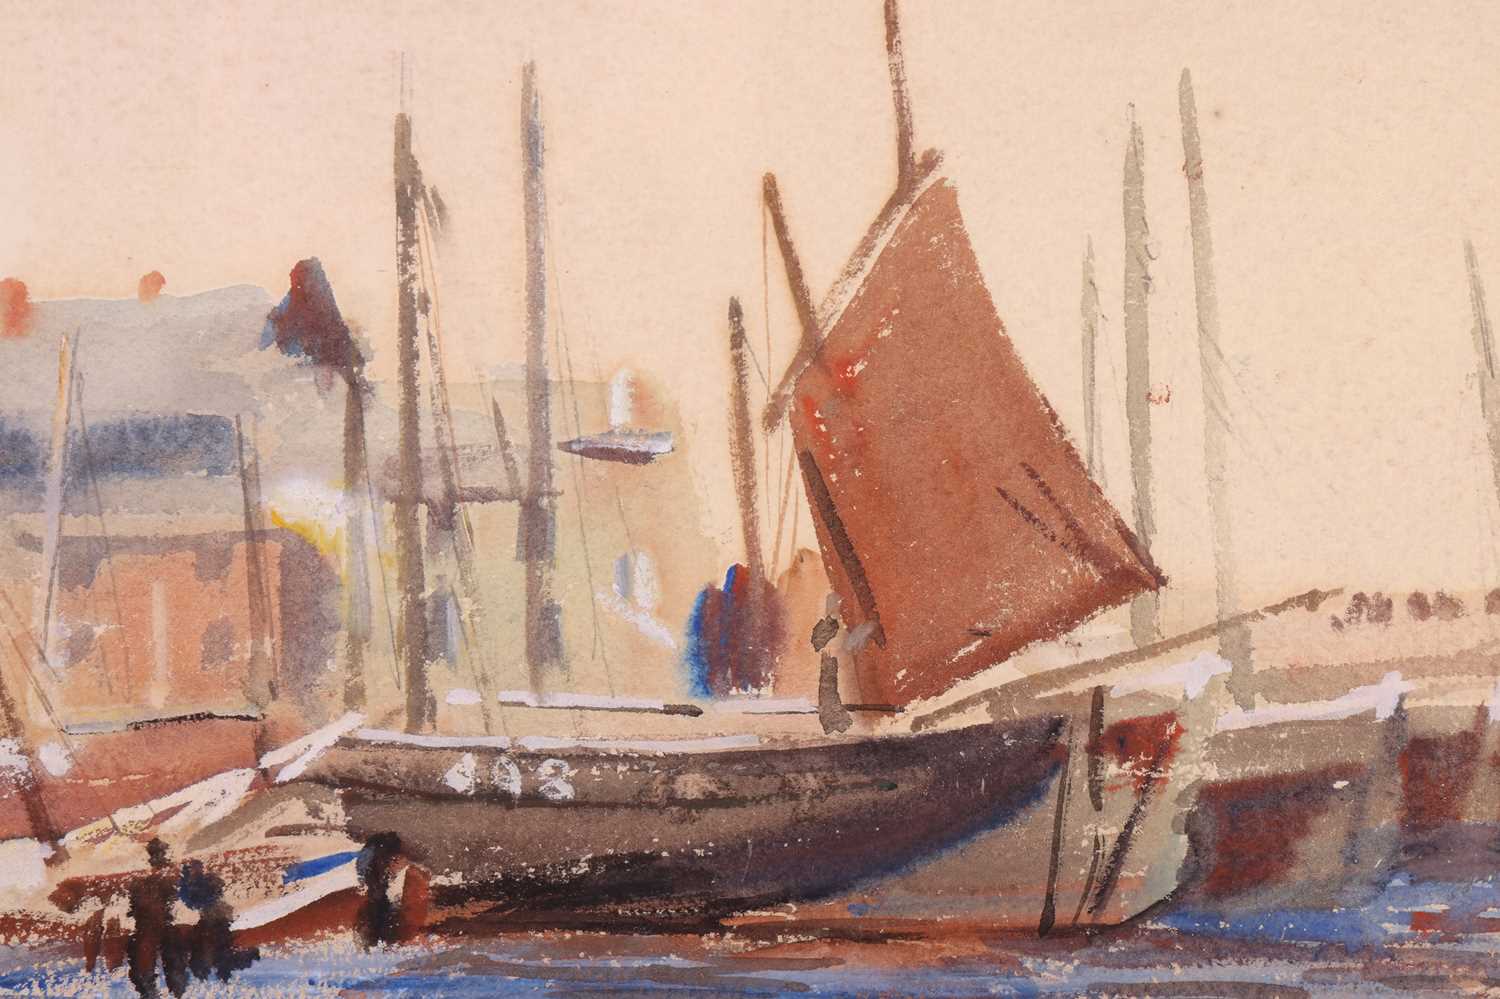 Dame Laura Knight (1877 - 1979), 'No. 1 Fishing Boats' - a harbour scene, signed Laura Knight in pen - Image 4 of 7